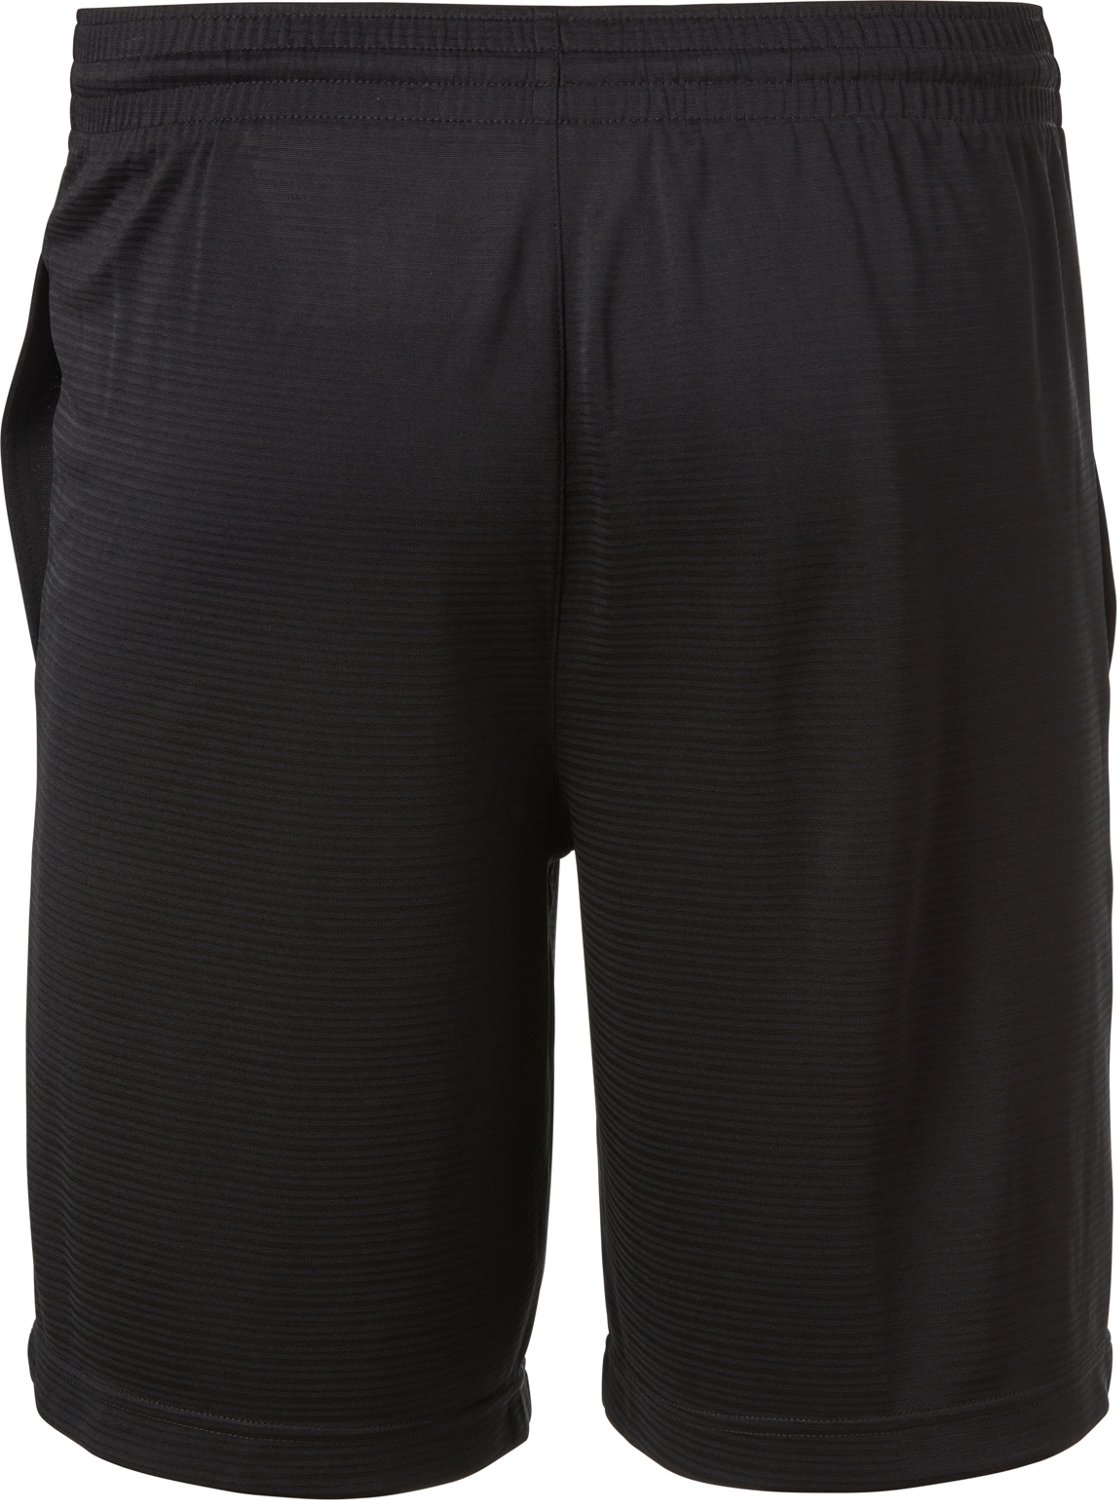 BCG Men's Dazzle Basketball Shorts 9 in | Academy